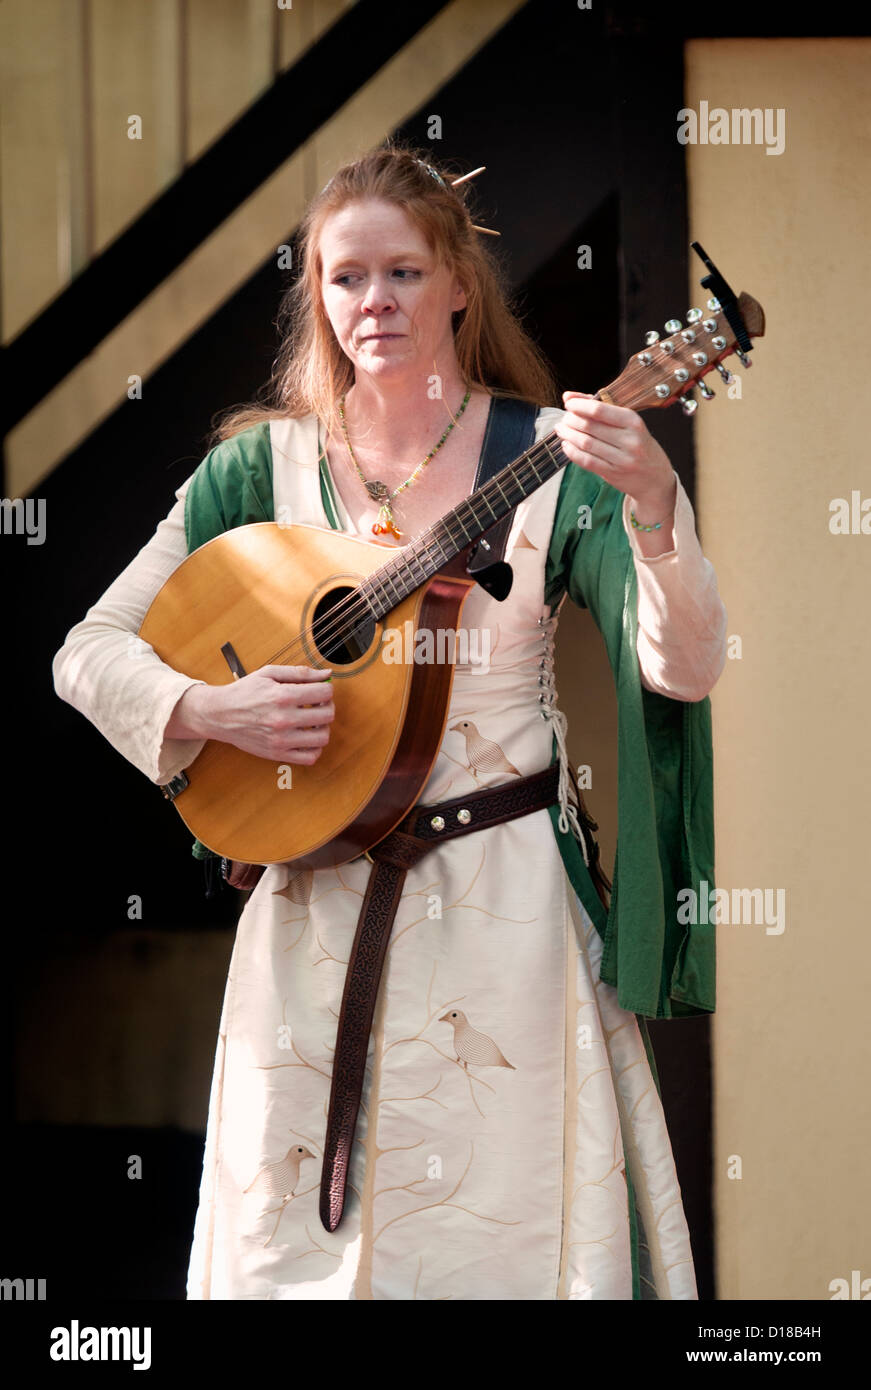 Abby Green Irish Medieval Folk Music at The Maryland Renaissance Festival 2012, Crownsville Road, Annapolis, Maryland. Stock Photo